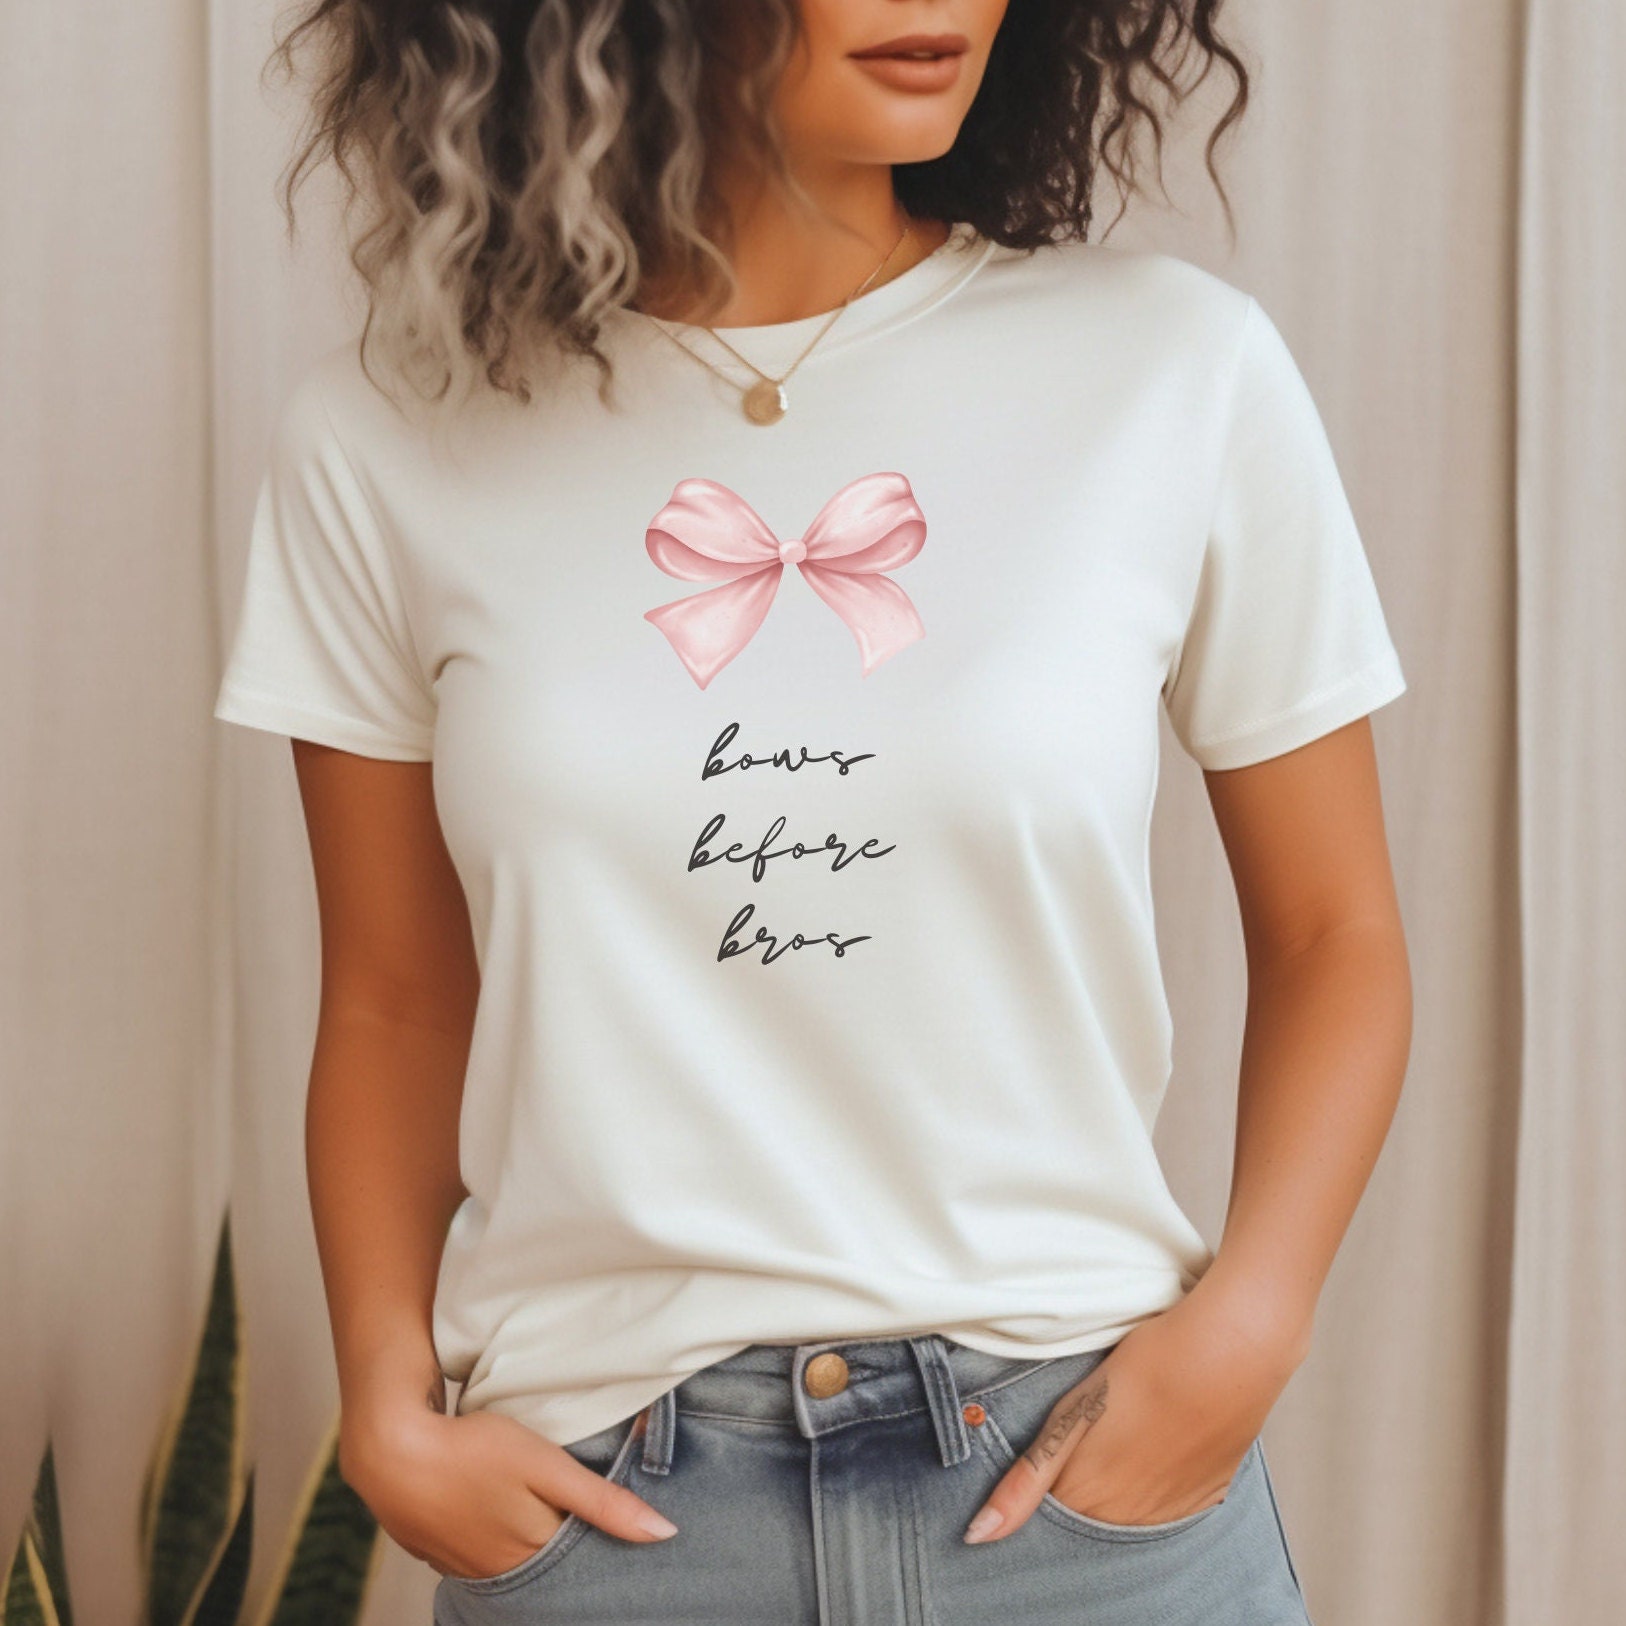 Cute Bow T-shirt, Coquette T-shirt for Her, Funny Bow Tee, Cute